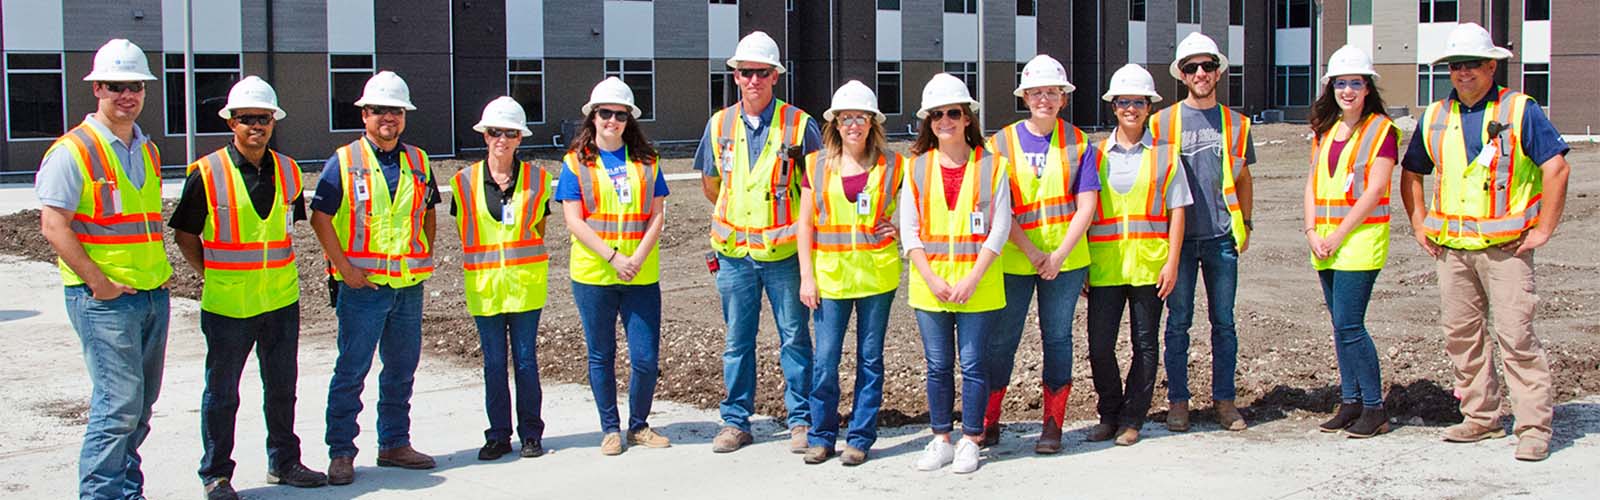 A group of construction workers posing for a photo.